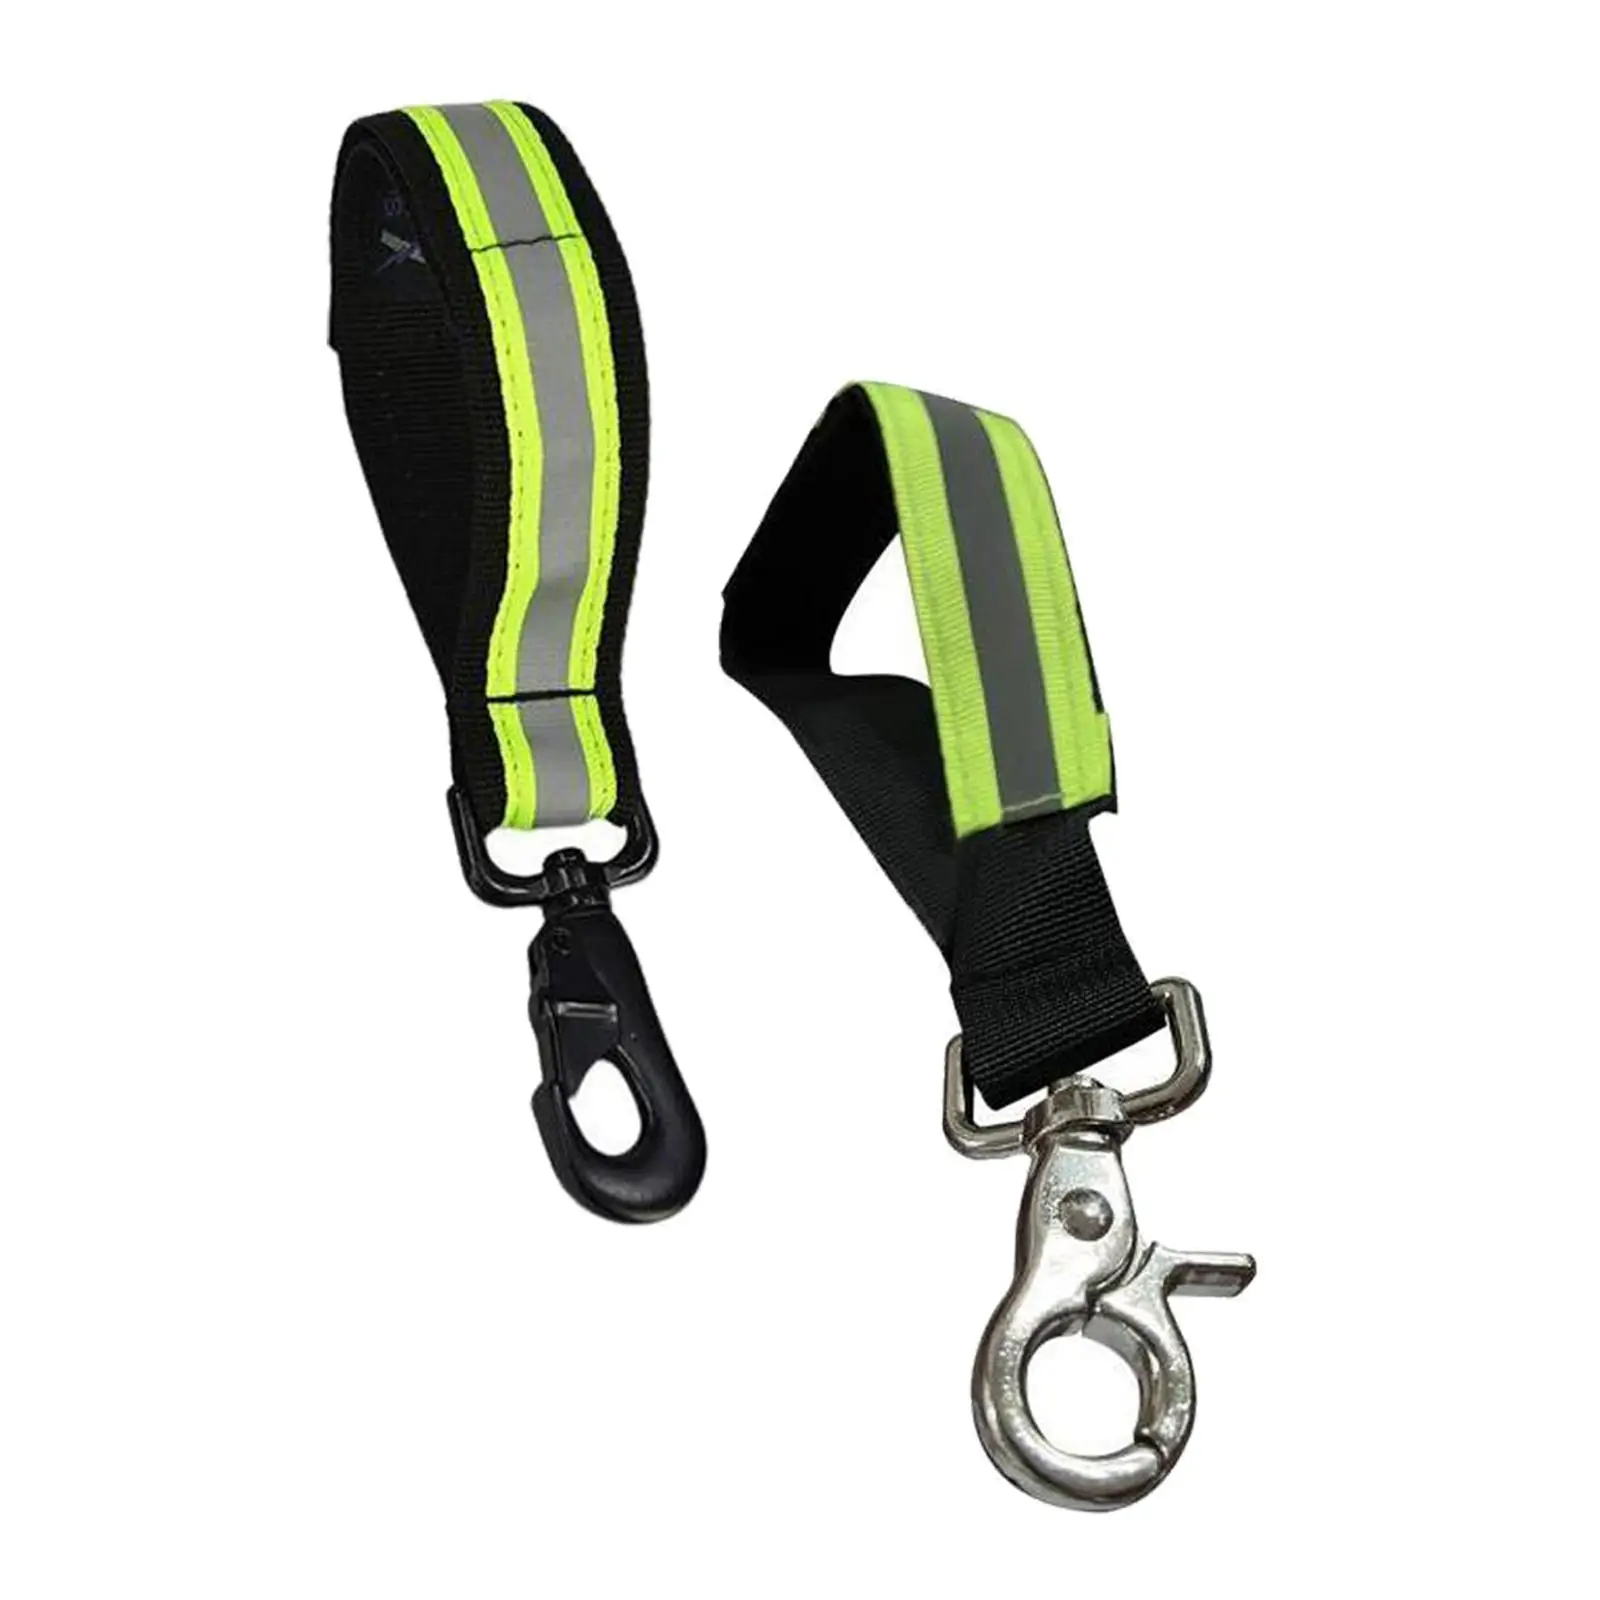 2pcs Firefighter Glove Strap,, Fireman Turnout Gear, Reflective with Buckle Tool Heavy Duty for Welding Gloves Accessories